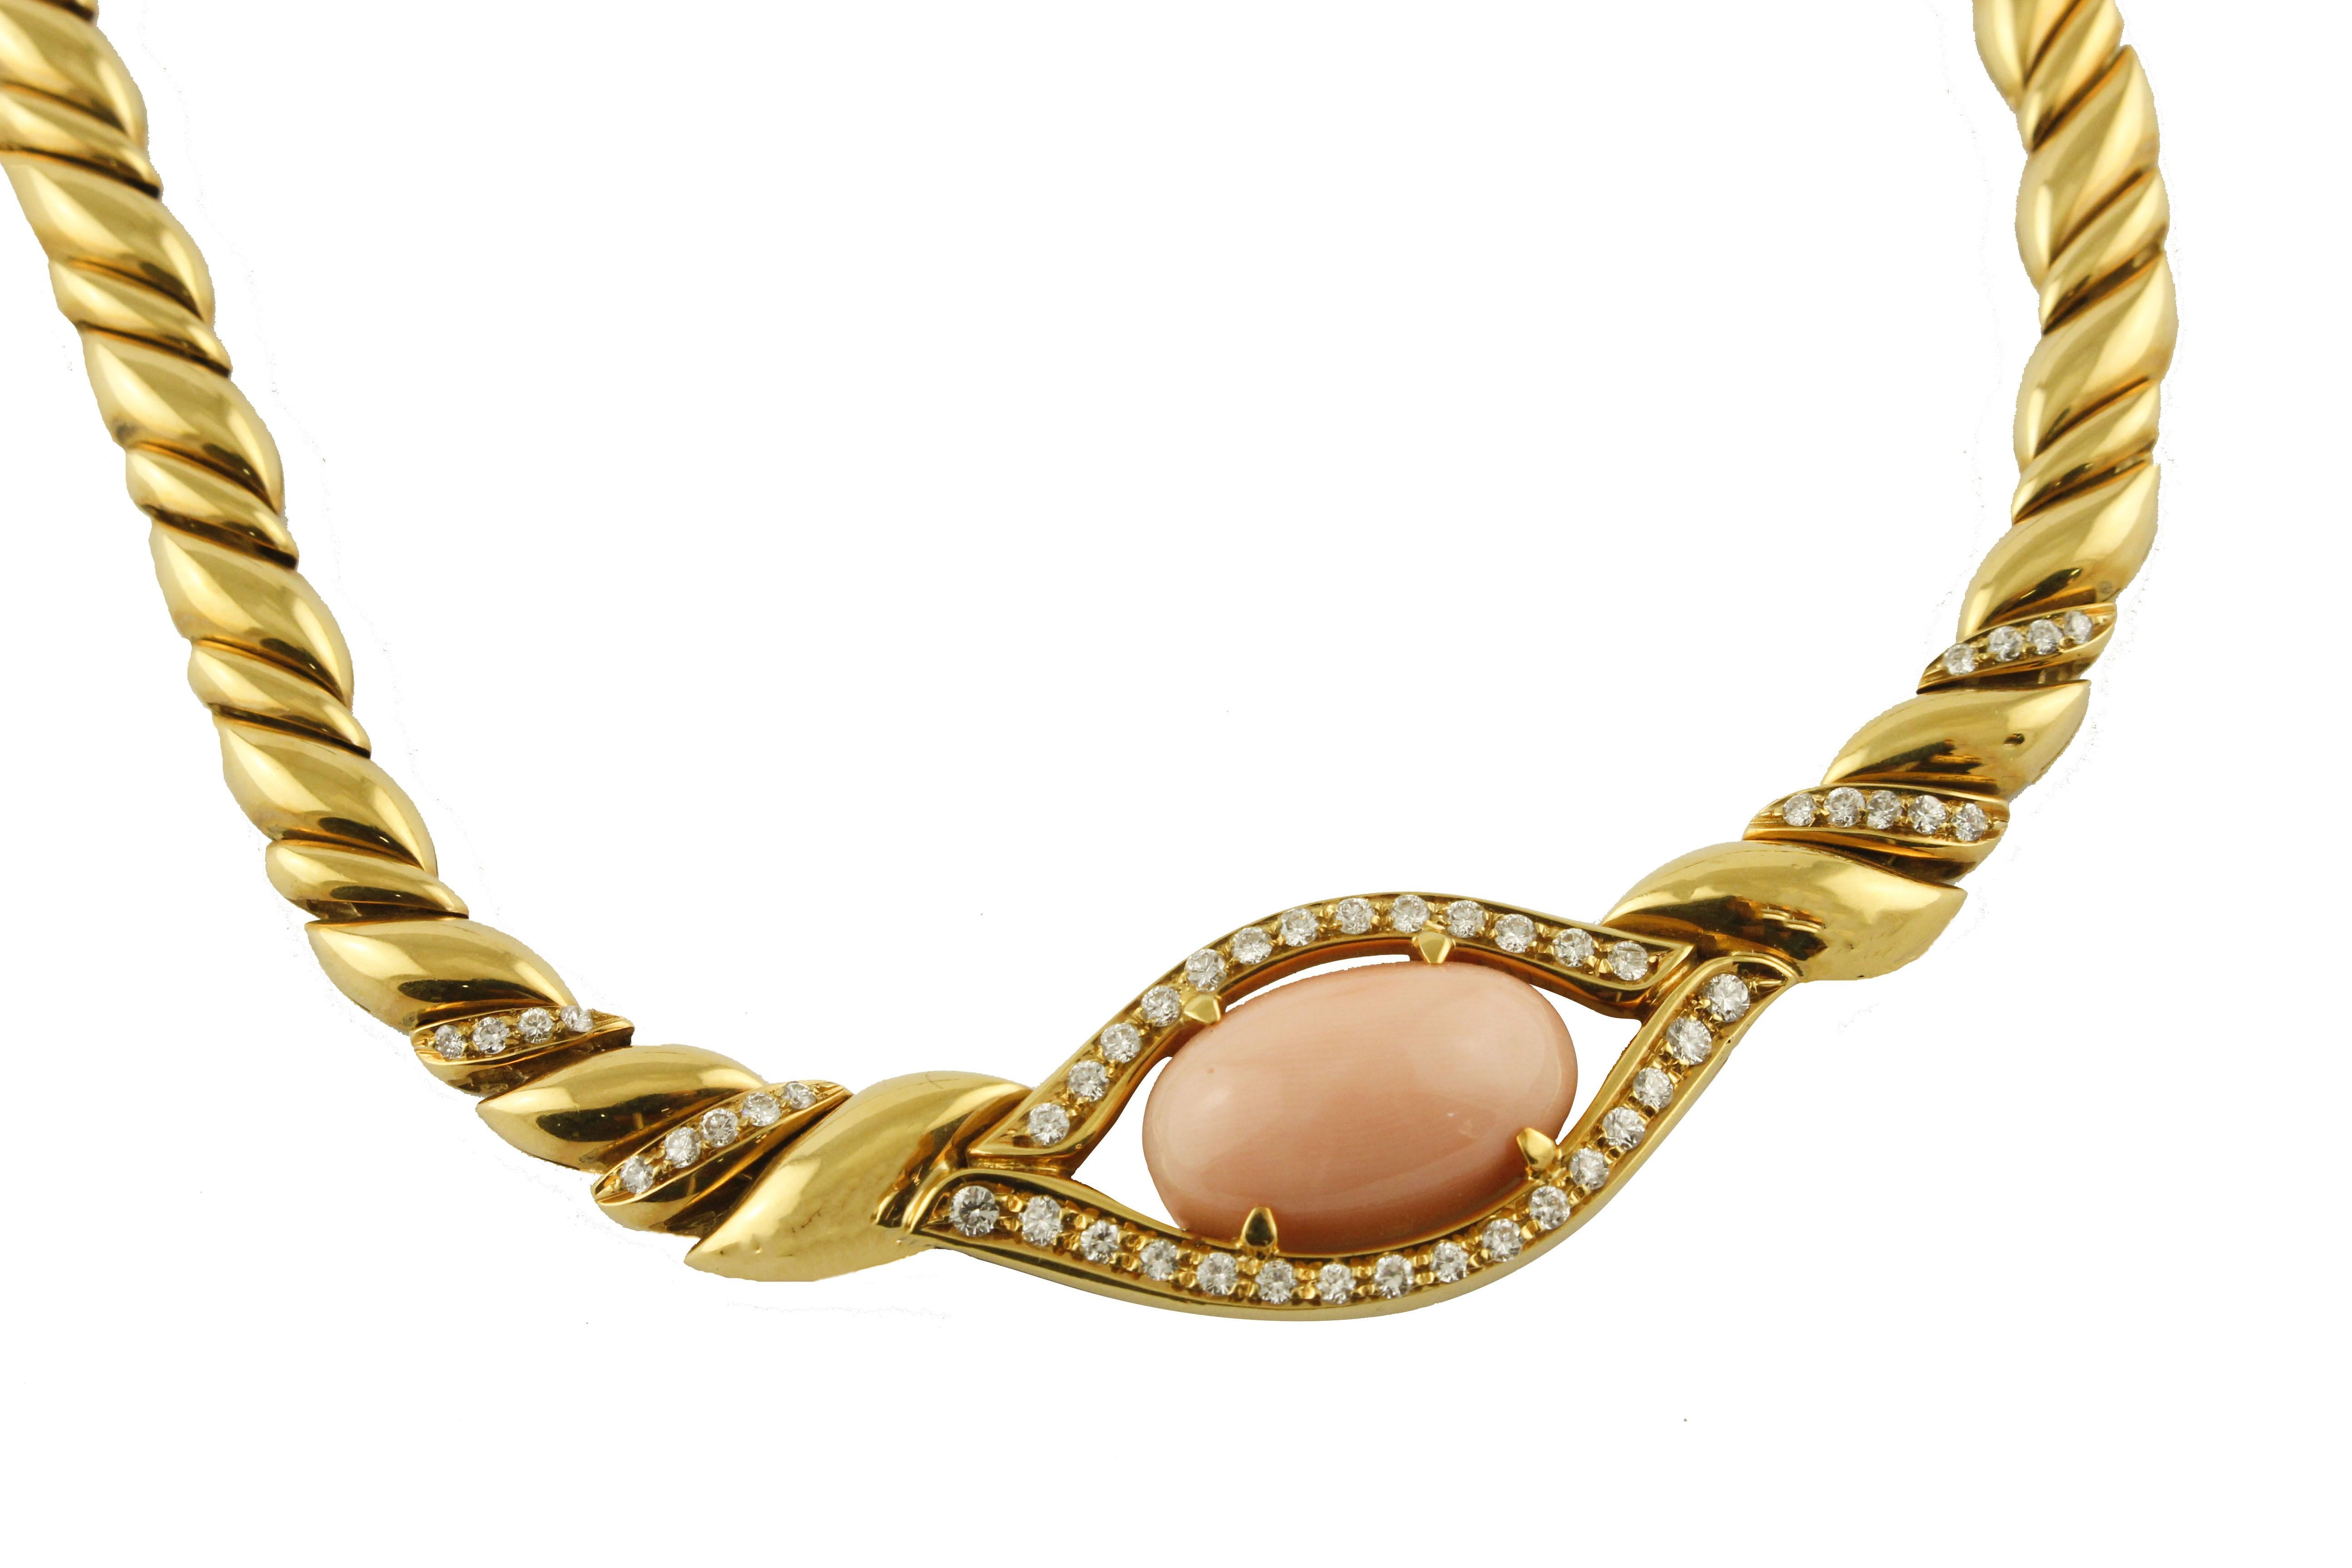 Round Cut White Diamonds, Pink Oval Shape Coral, 18K Yellow Gold Chain Necklace